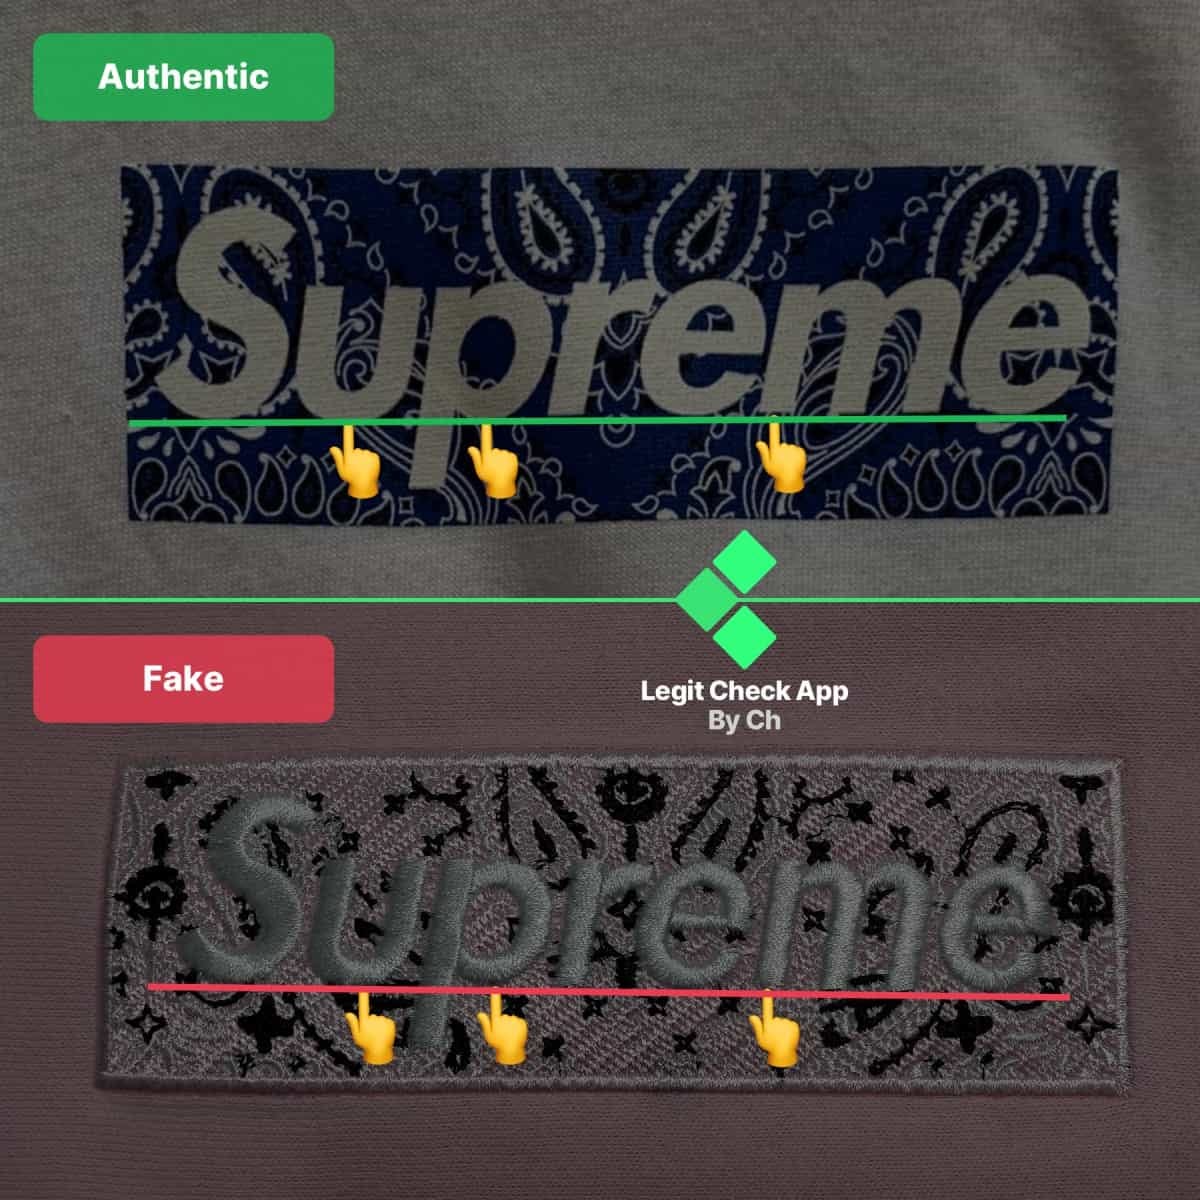 Legit Check By Ch - In the fake vs real Supreme box logo tee image